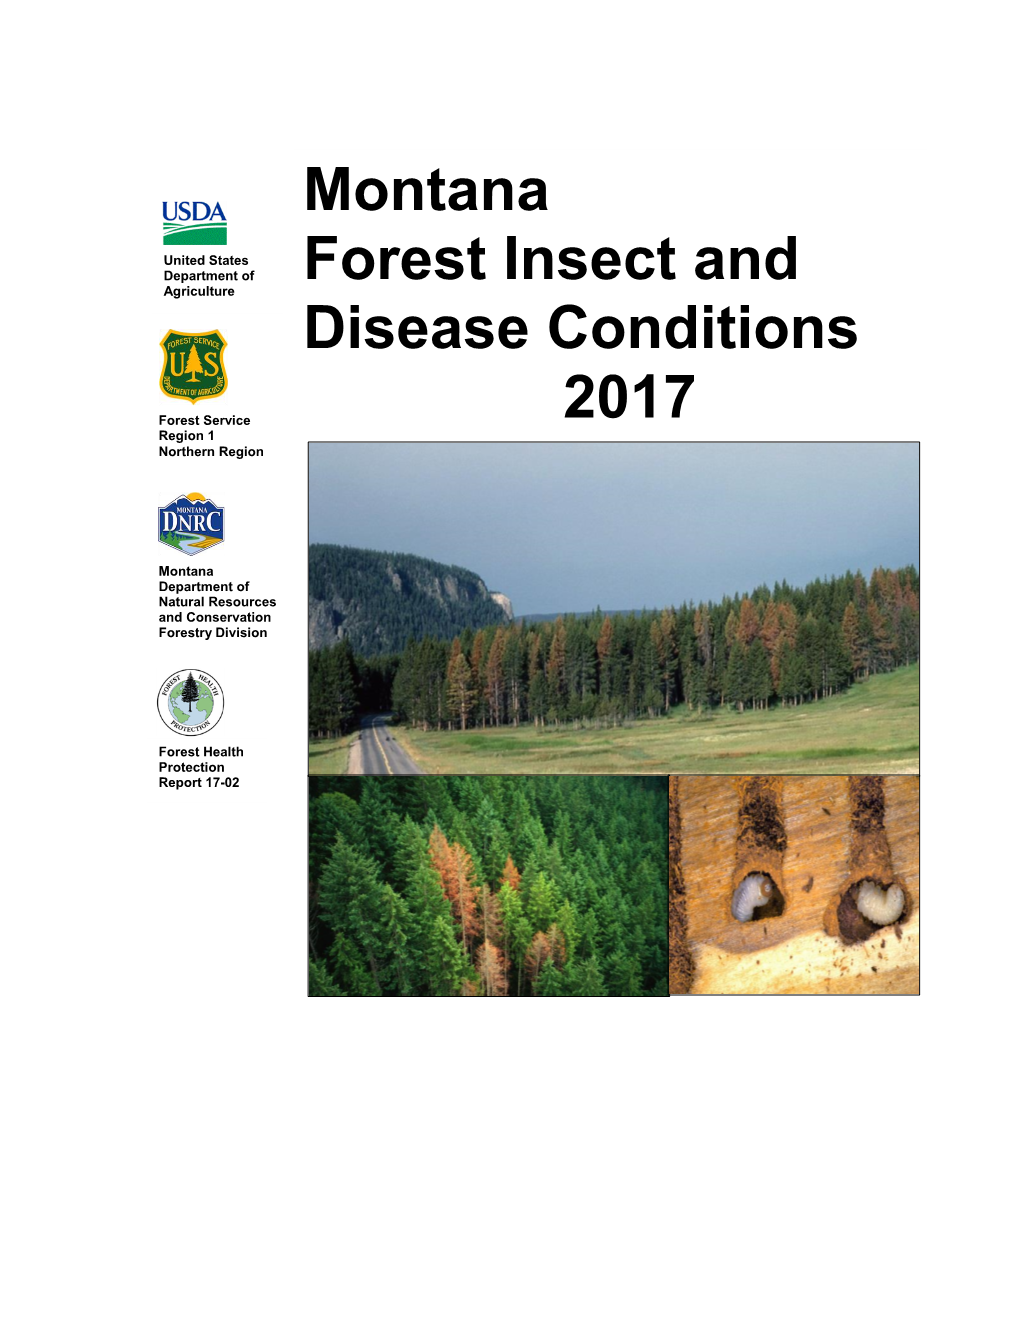 Montana Forest Insect and Disease Conditions 2017